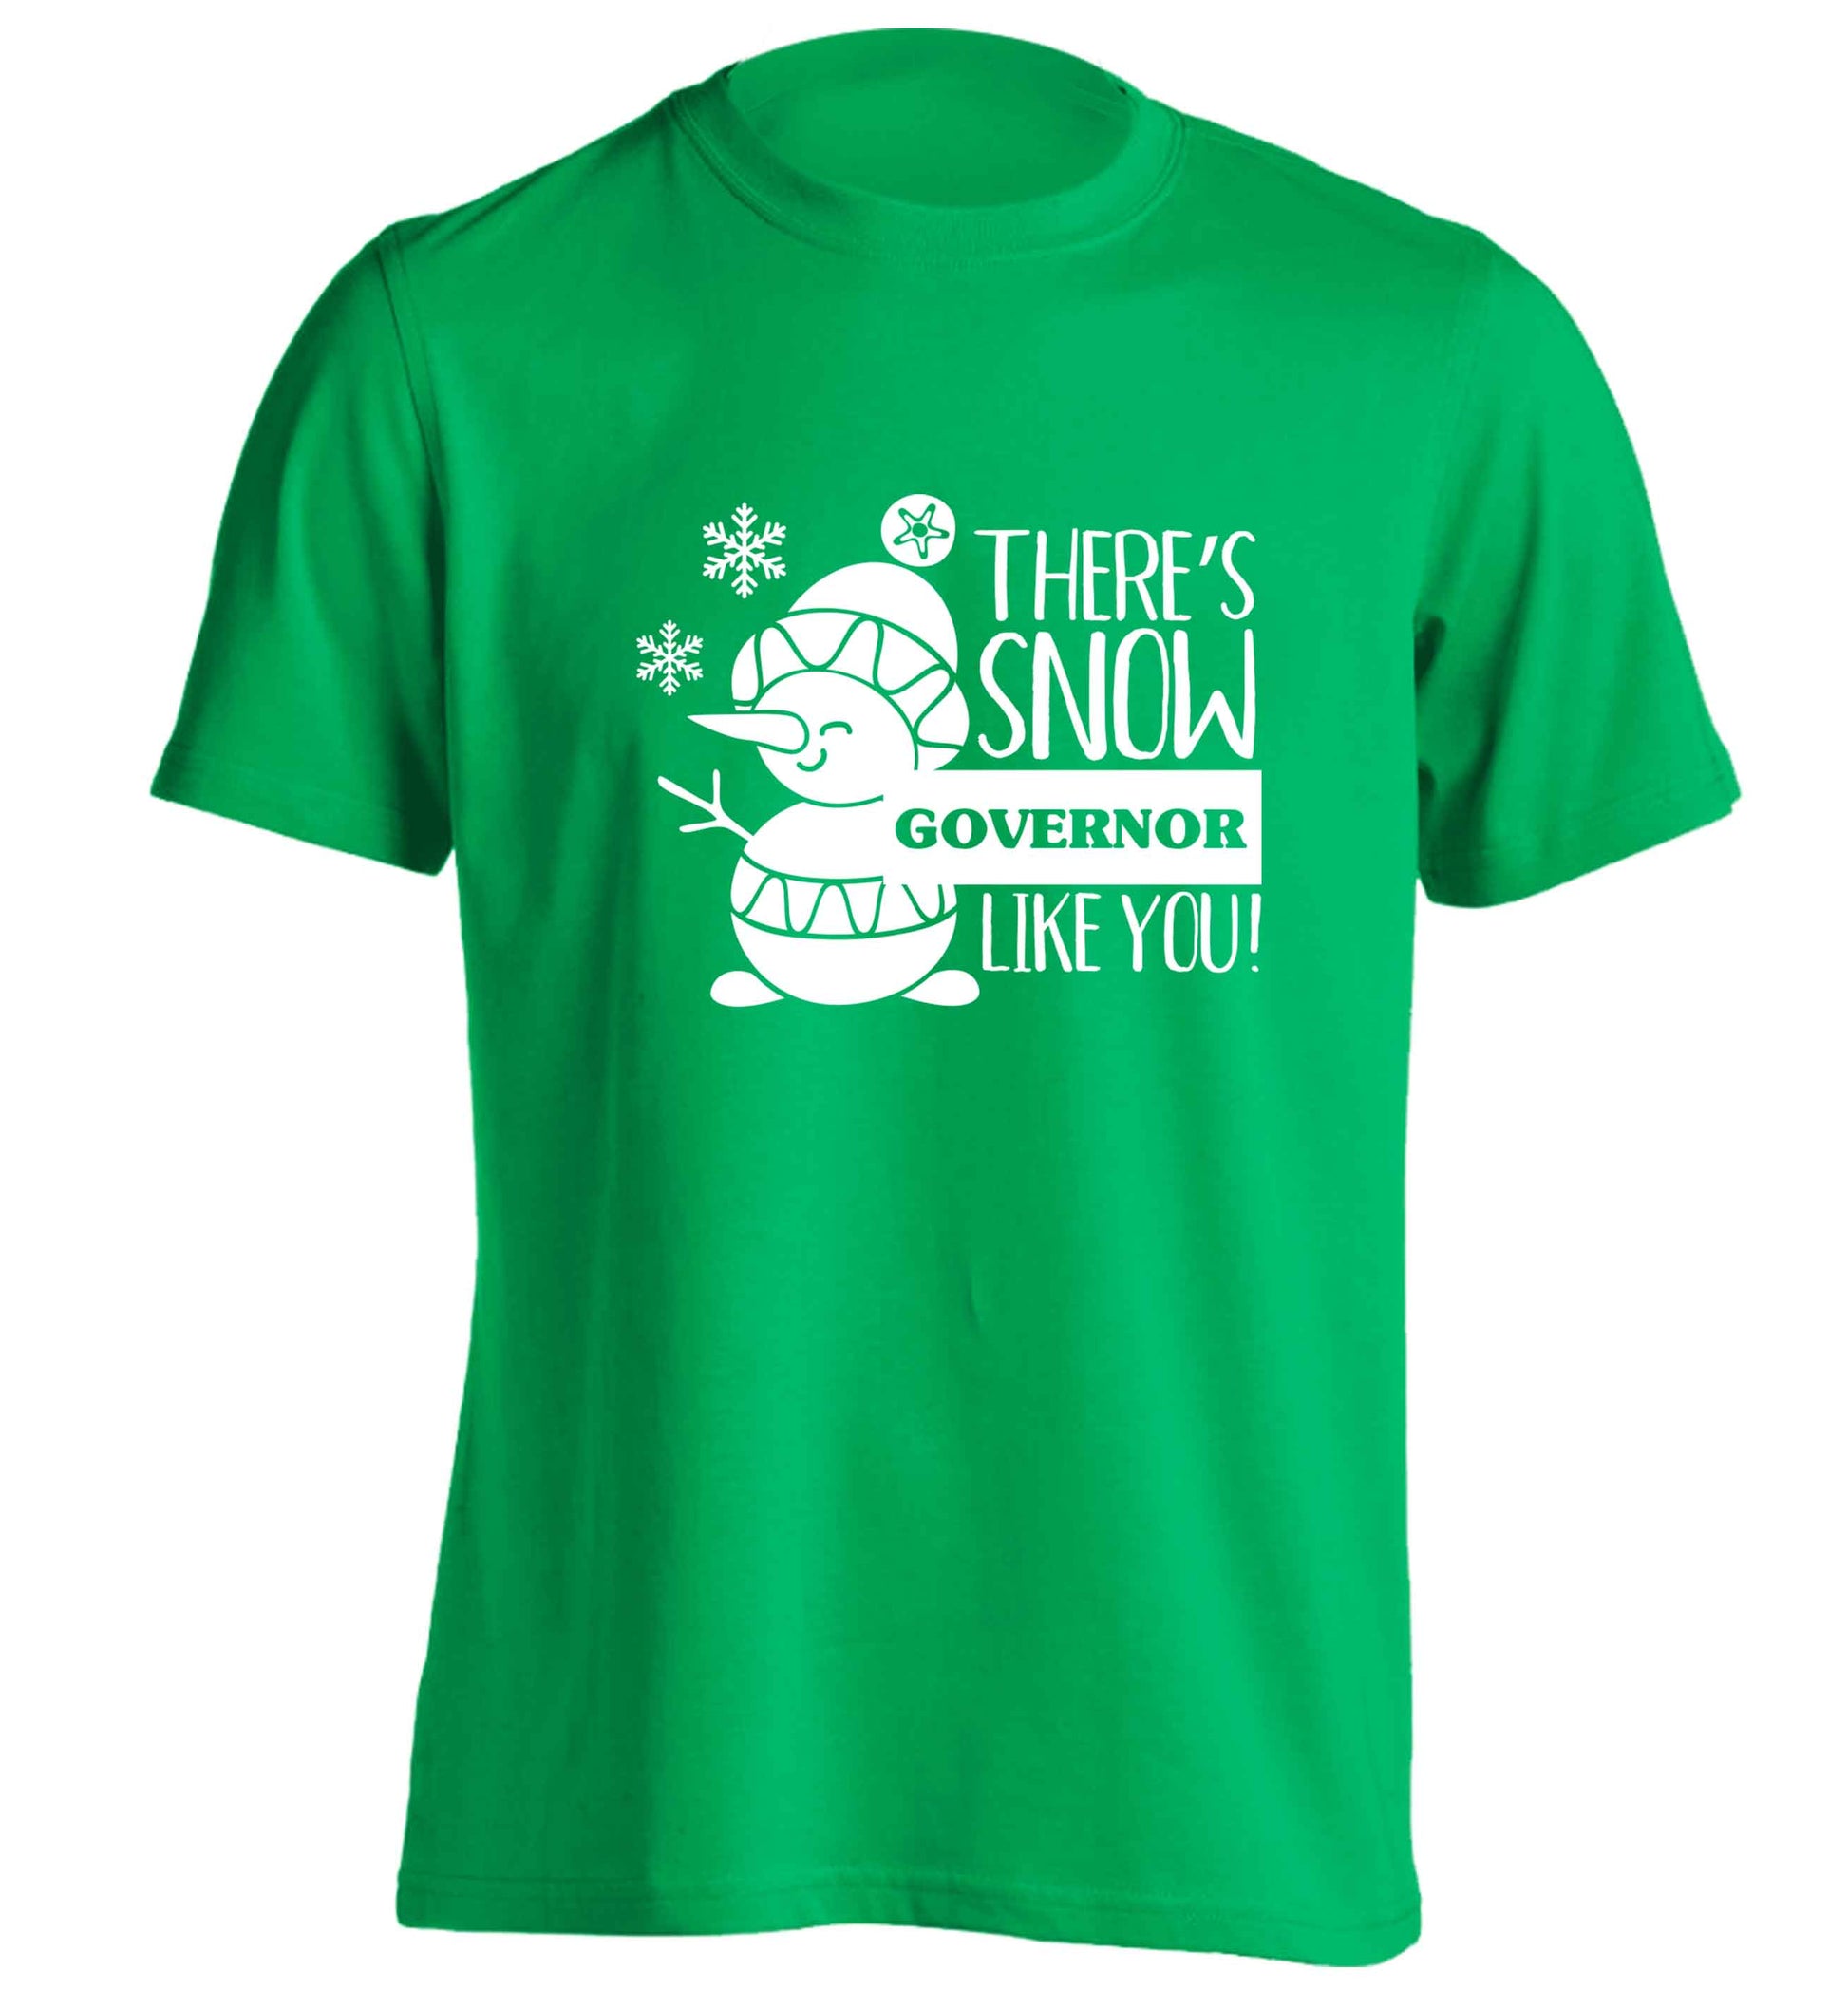 There's snow governor like you adults unisex green Tshirt 2XL